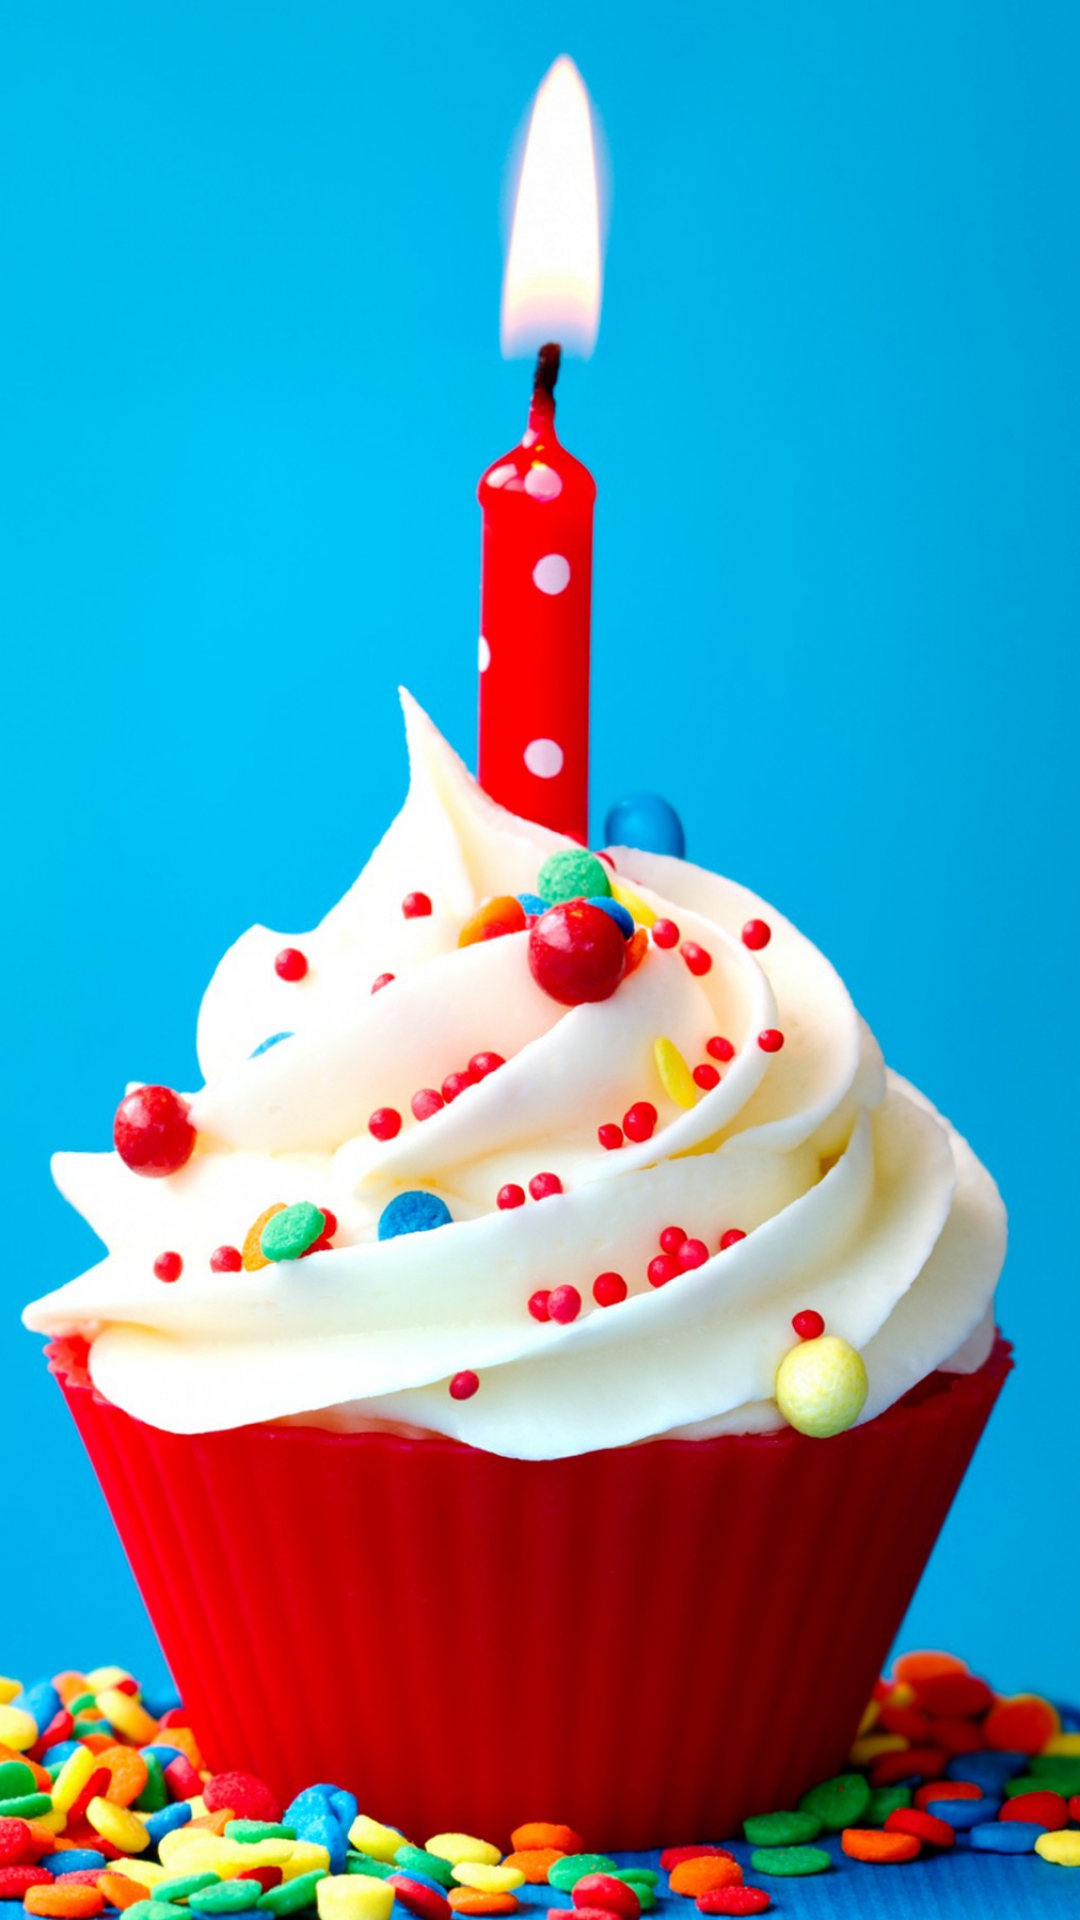 Birthday cake   Best htc one wallpapers free and easy to downloadHTC